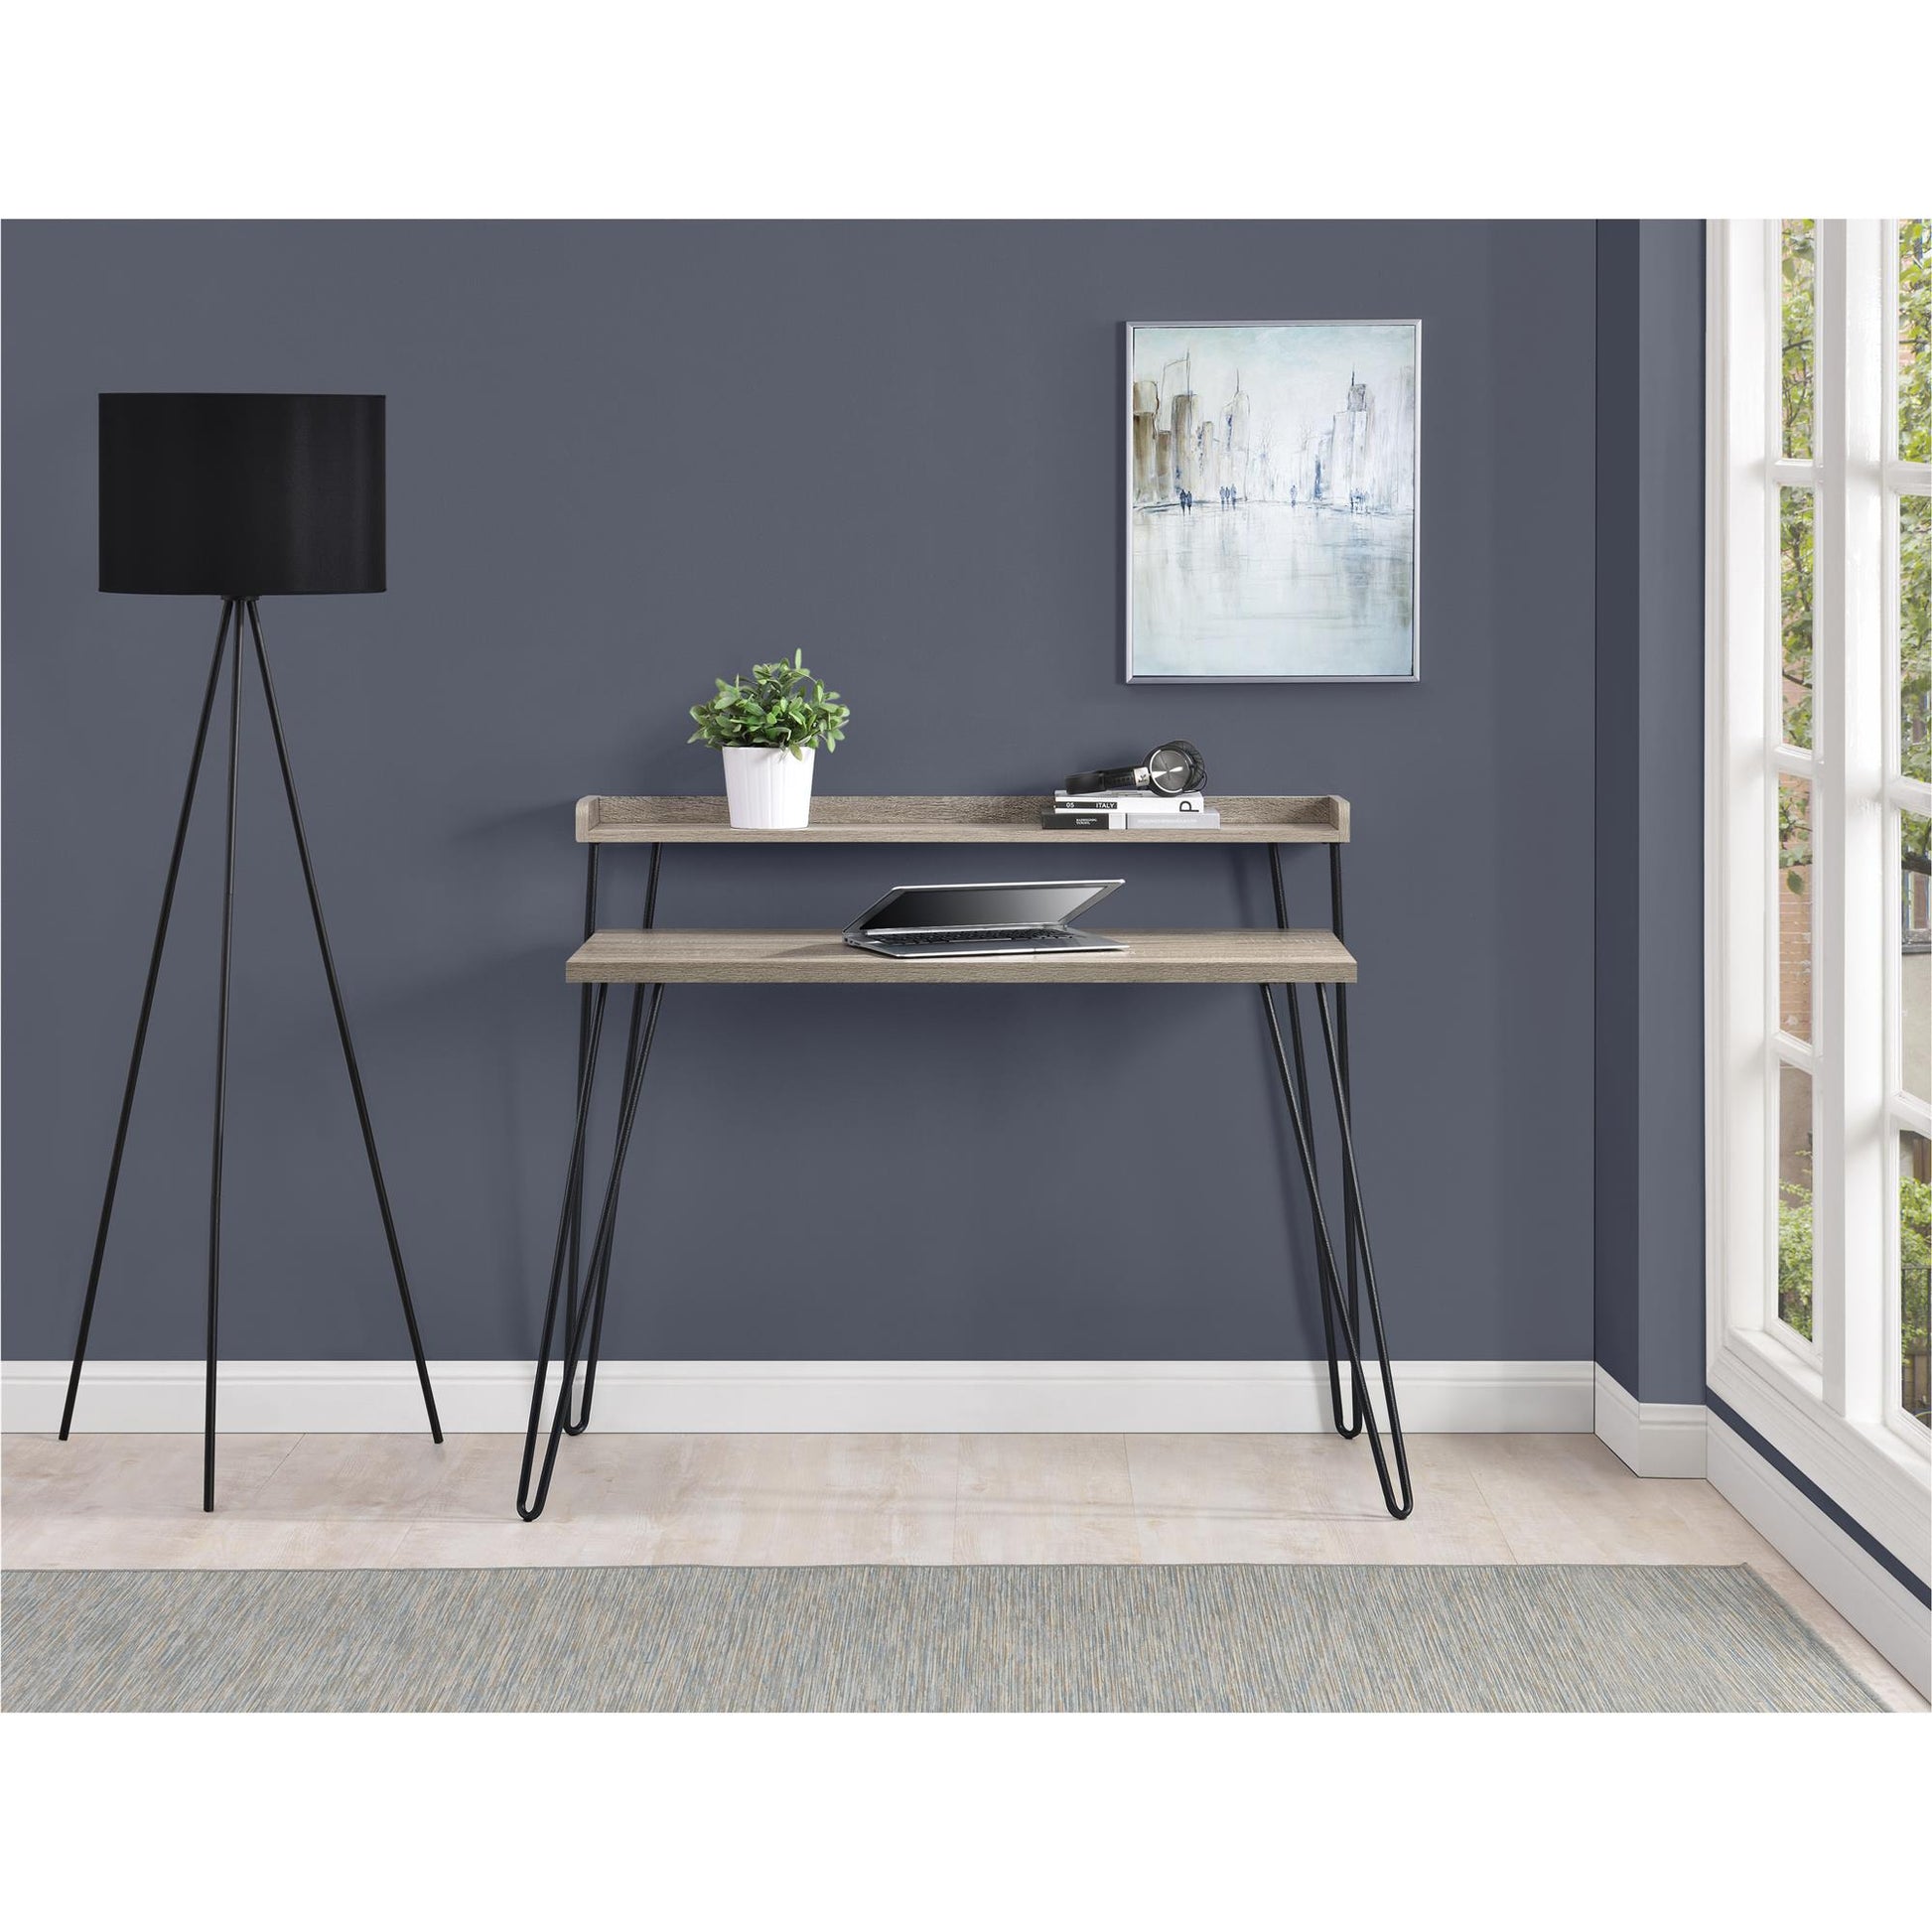 Haven Retro Computer Desk with Riser and Metal Hairpin Legs - Distressed Gray Oak